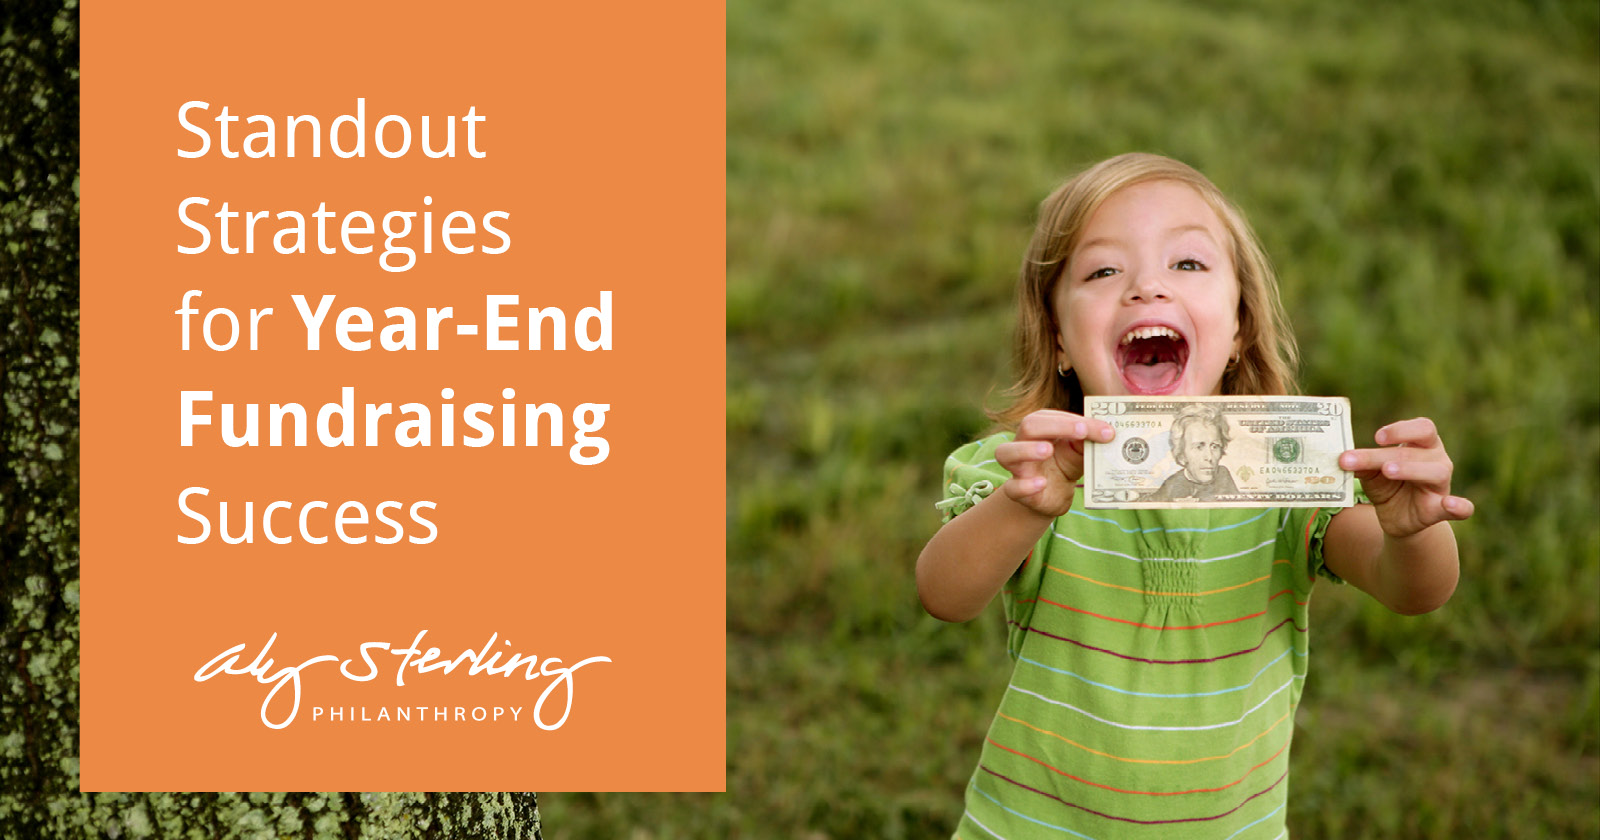 5 Standout Strategies for Year-End Fundraising Success